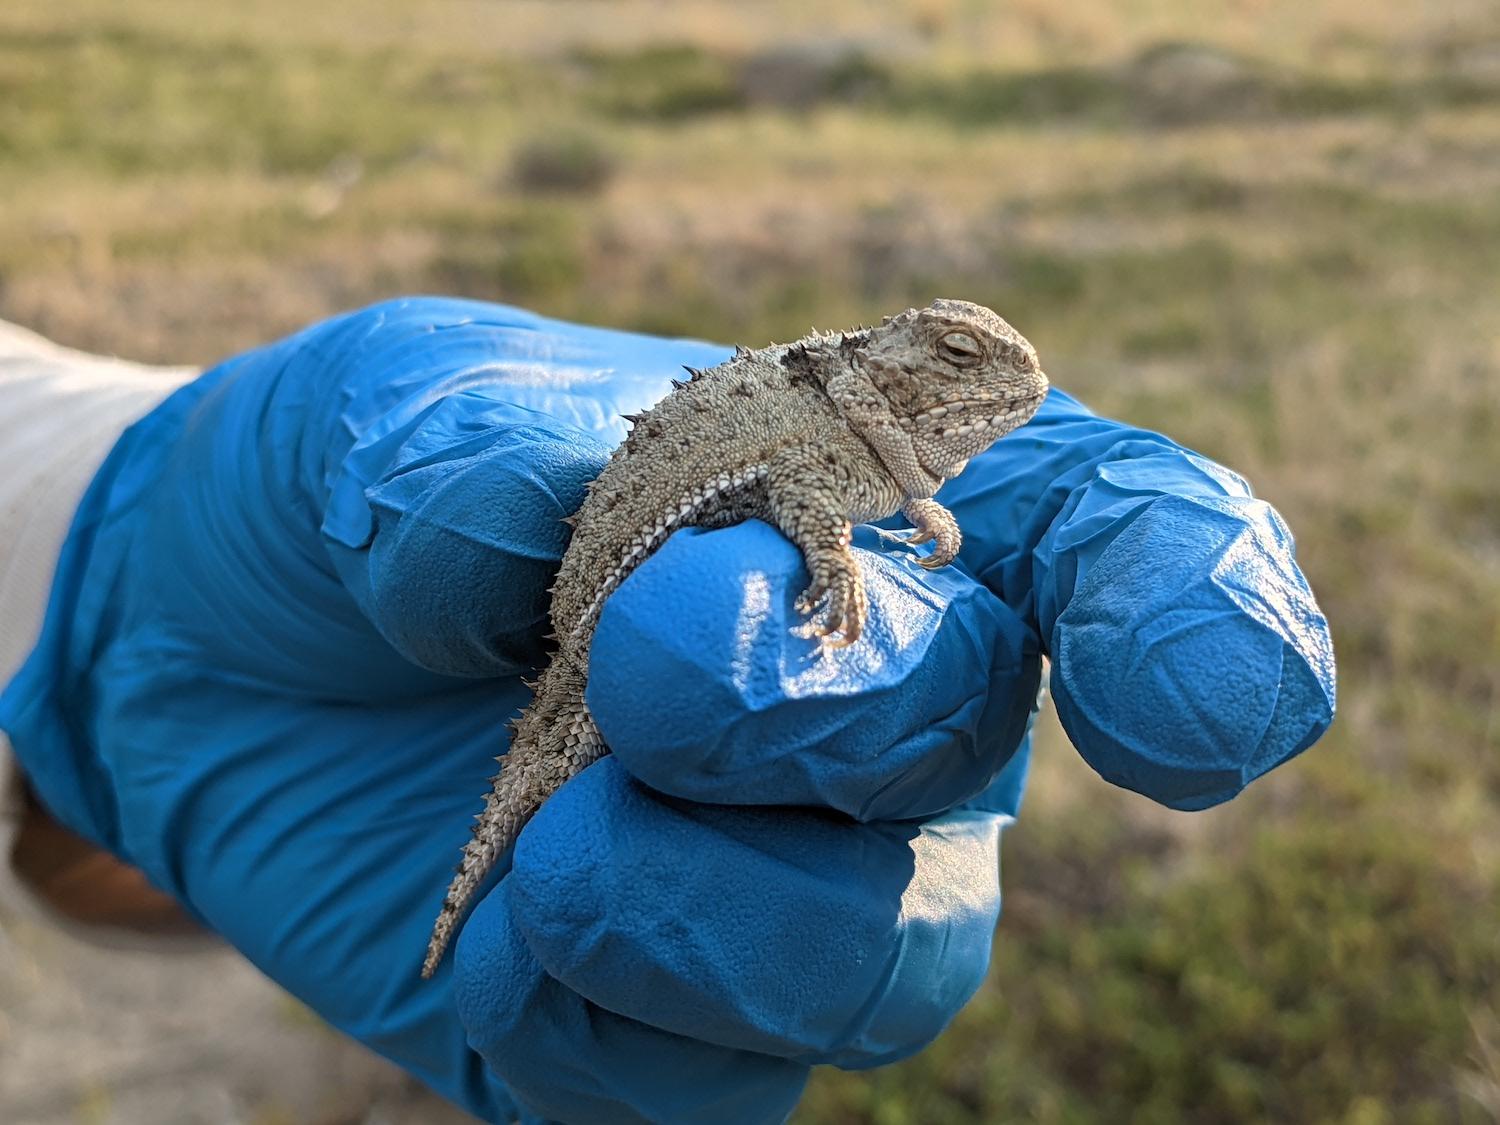 Parks Canada researchers are gentle when they do lizard surveys.